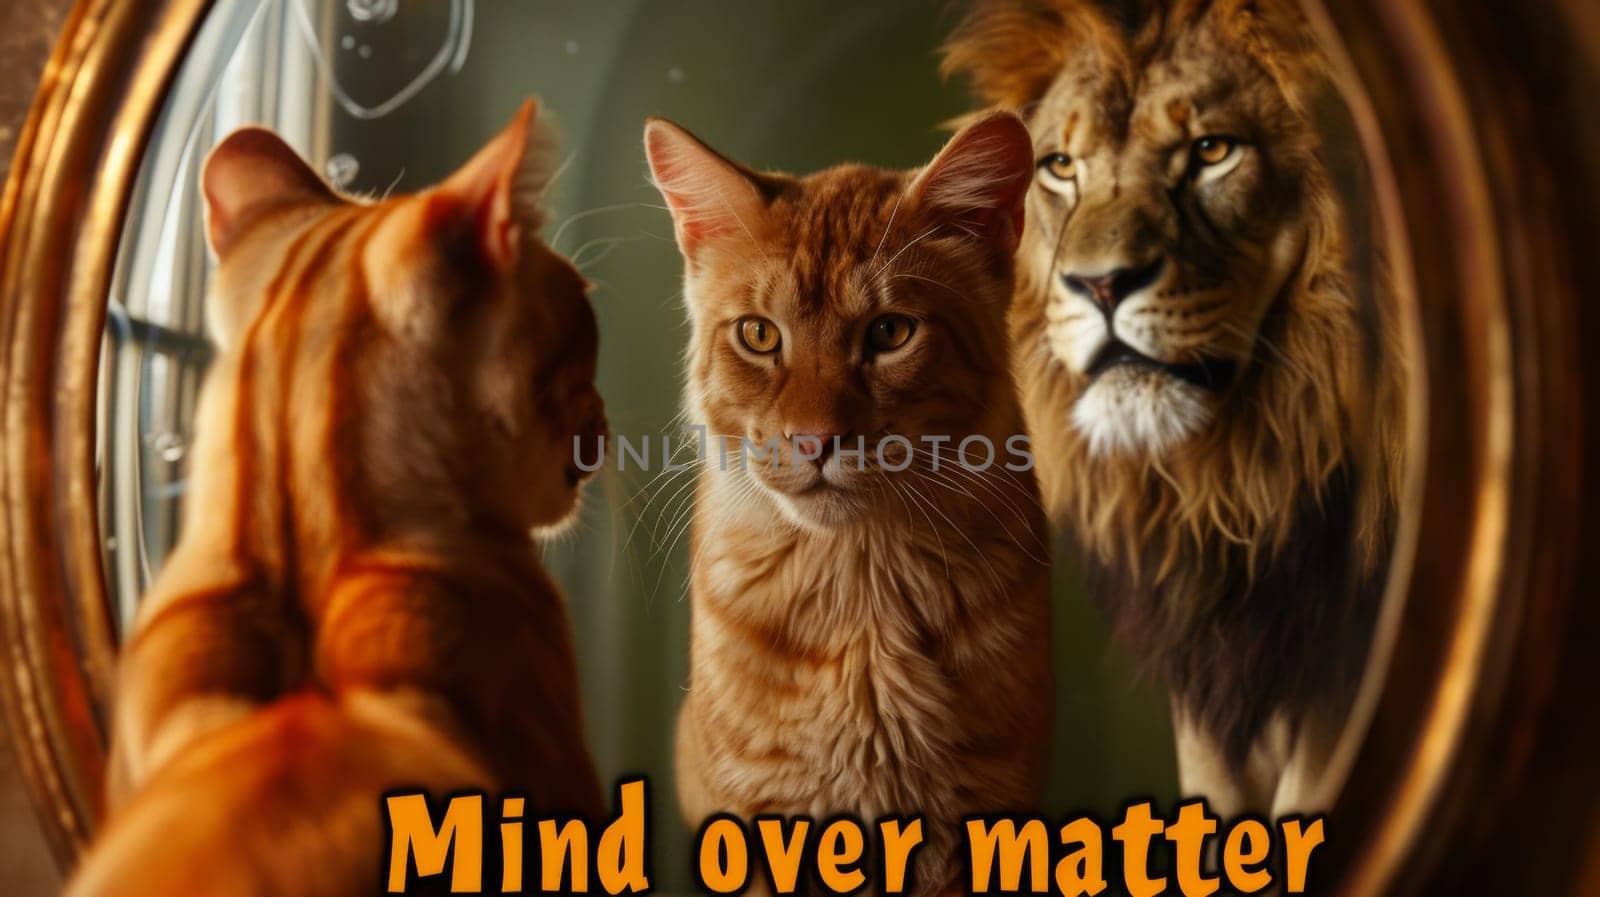 A cat looking at a lion in the mirror and another cat, AI by starush